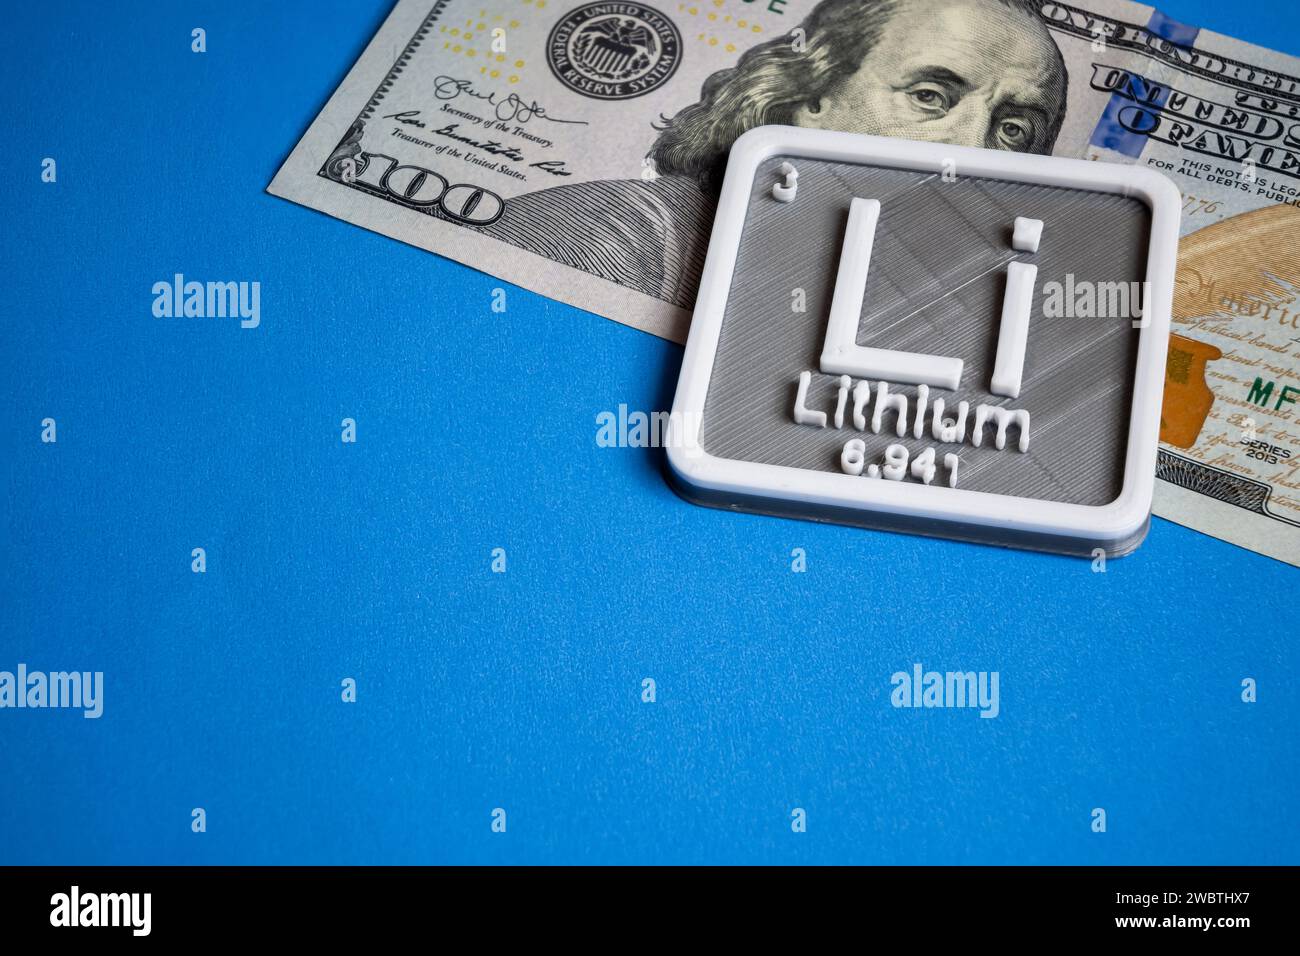 Lithium concept with a hundred dollar bill on a light blue background. Stock Photo